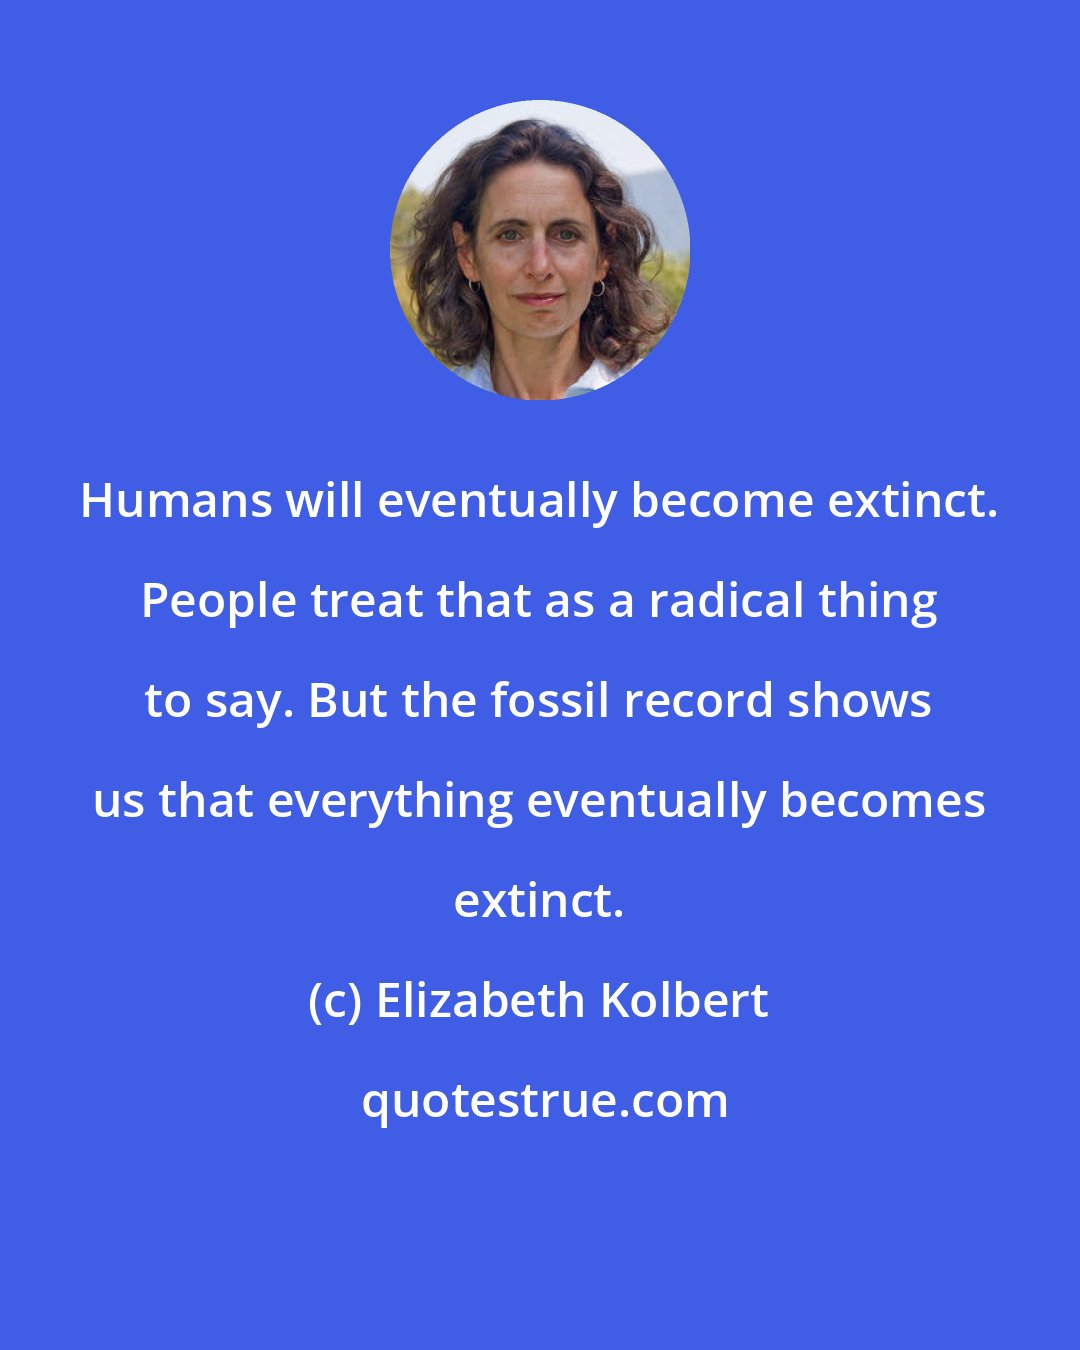 Elizabeth Kolbert: Humans will eventually become extinct. People treat that as a radical thing to say. But the fossil record shows us that everything eventually becomes extinct.